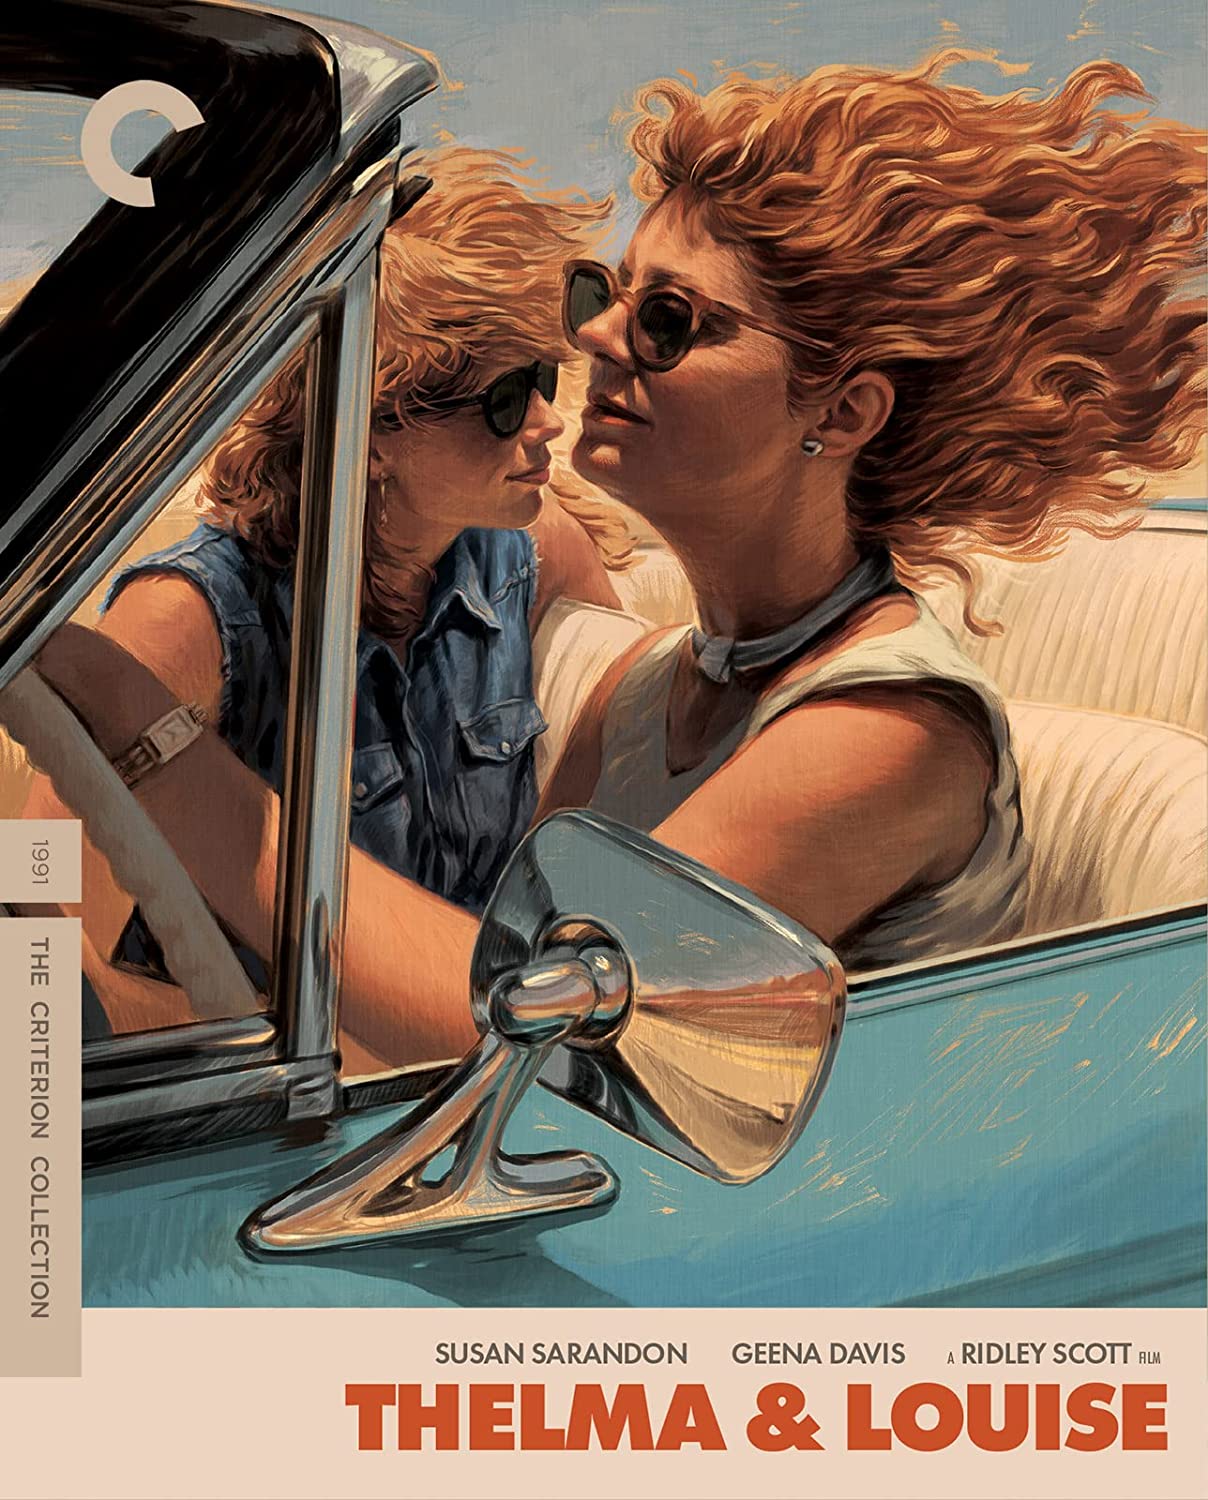 Thelma & Louise 4k Blu-ray The Criterion Collection